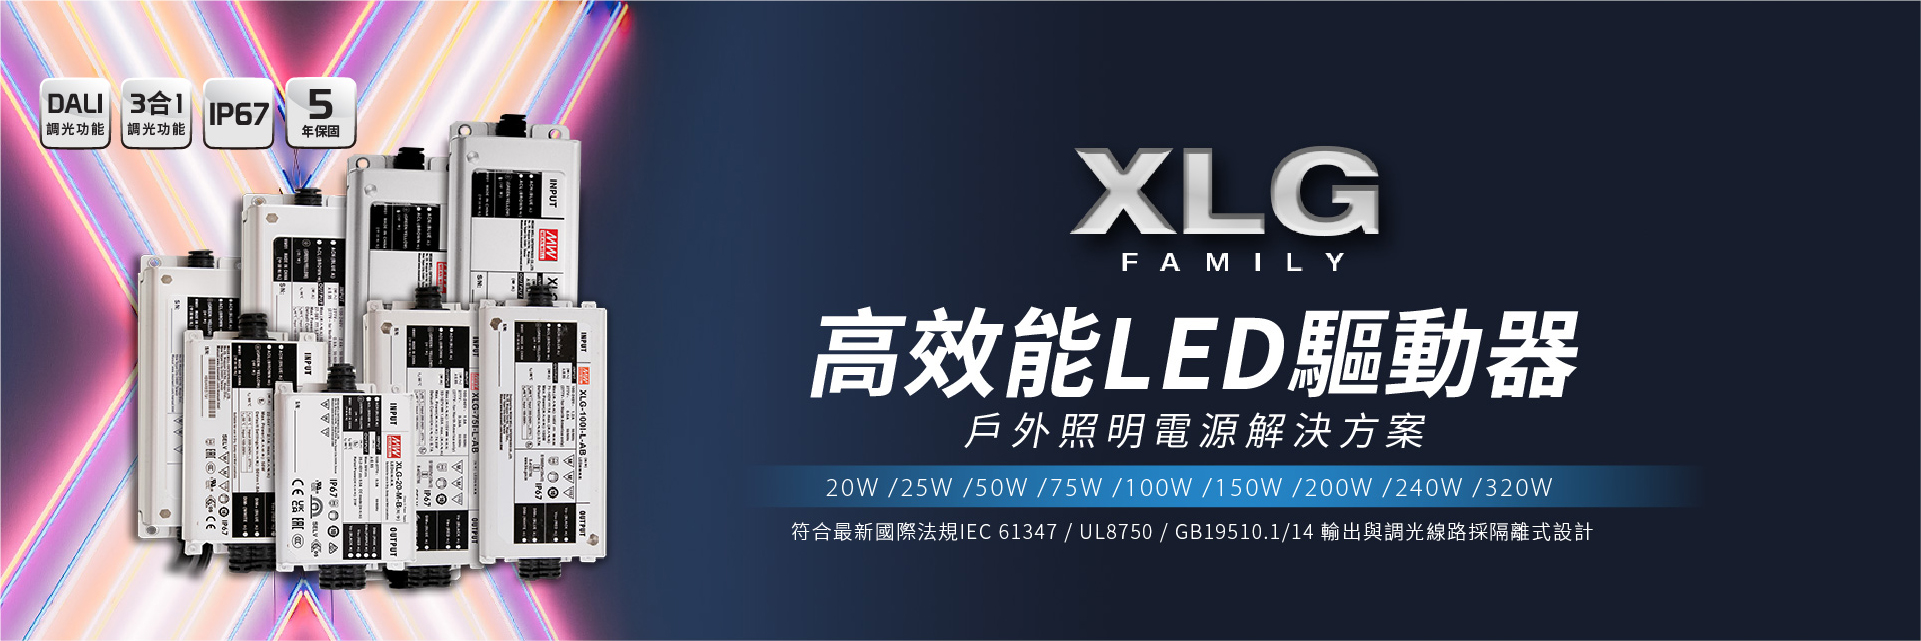 XLG系列